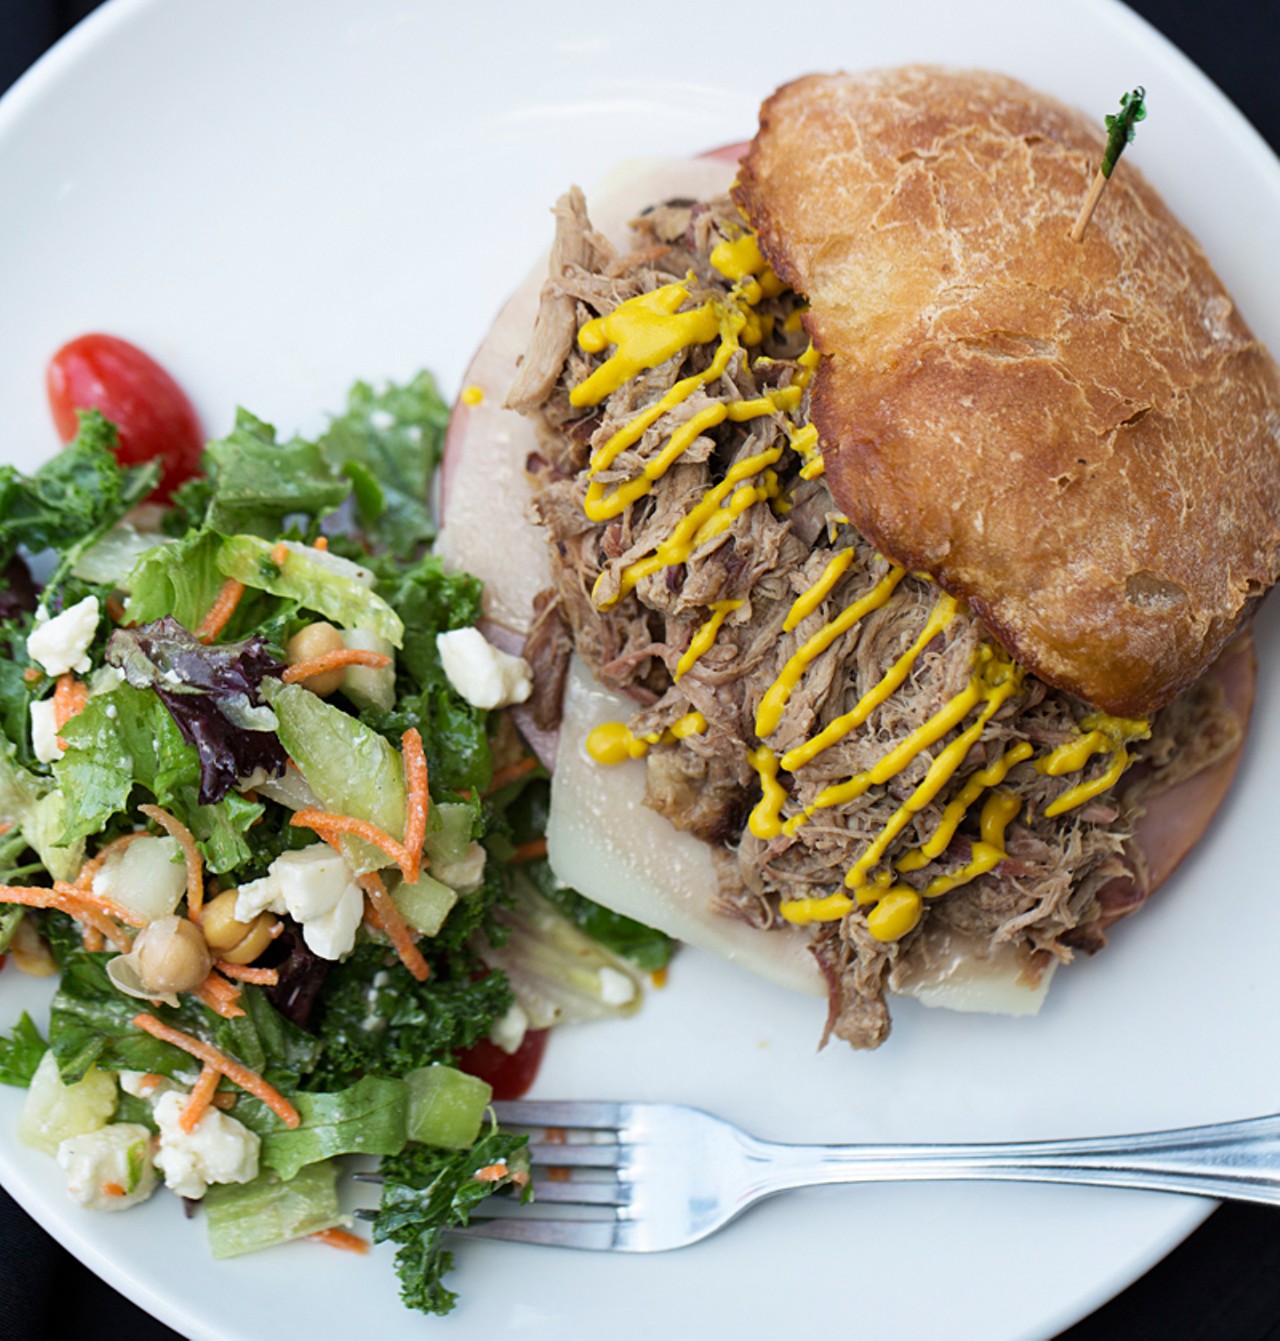 The Cuban sandwich brings pulled pork topped with Swiss cheese, ham, pickles and mustard. It's shown here with a side O-Line's chopped salad of mixed greens, kale, cucumber, celery, carrots, onions, tomato, chickpeas, feta and white balsamic vinaigrette.